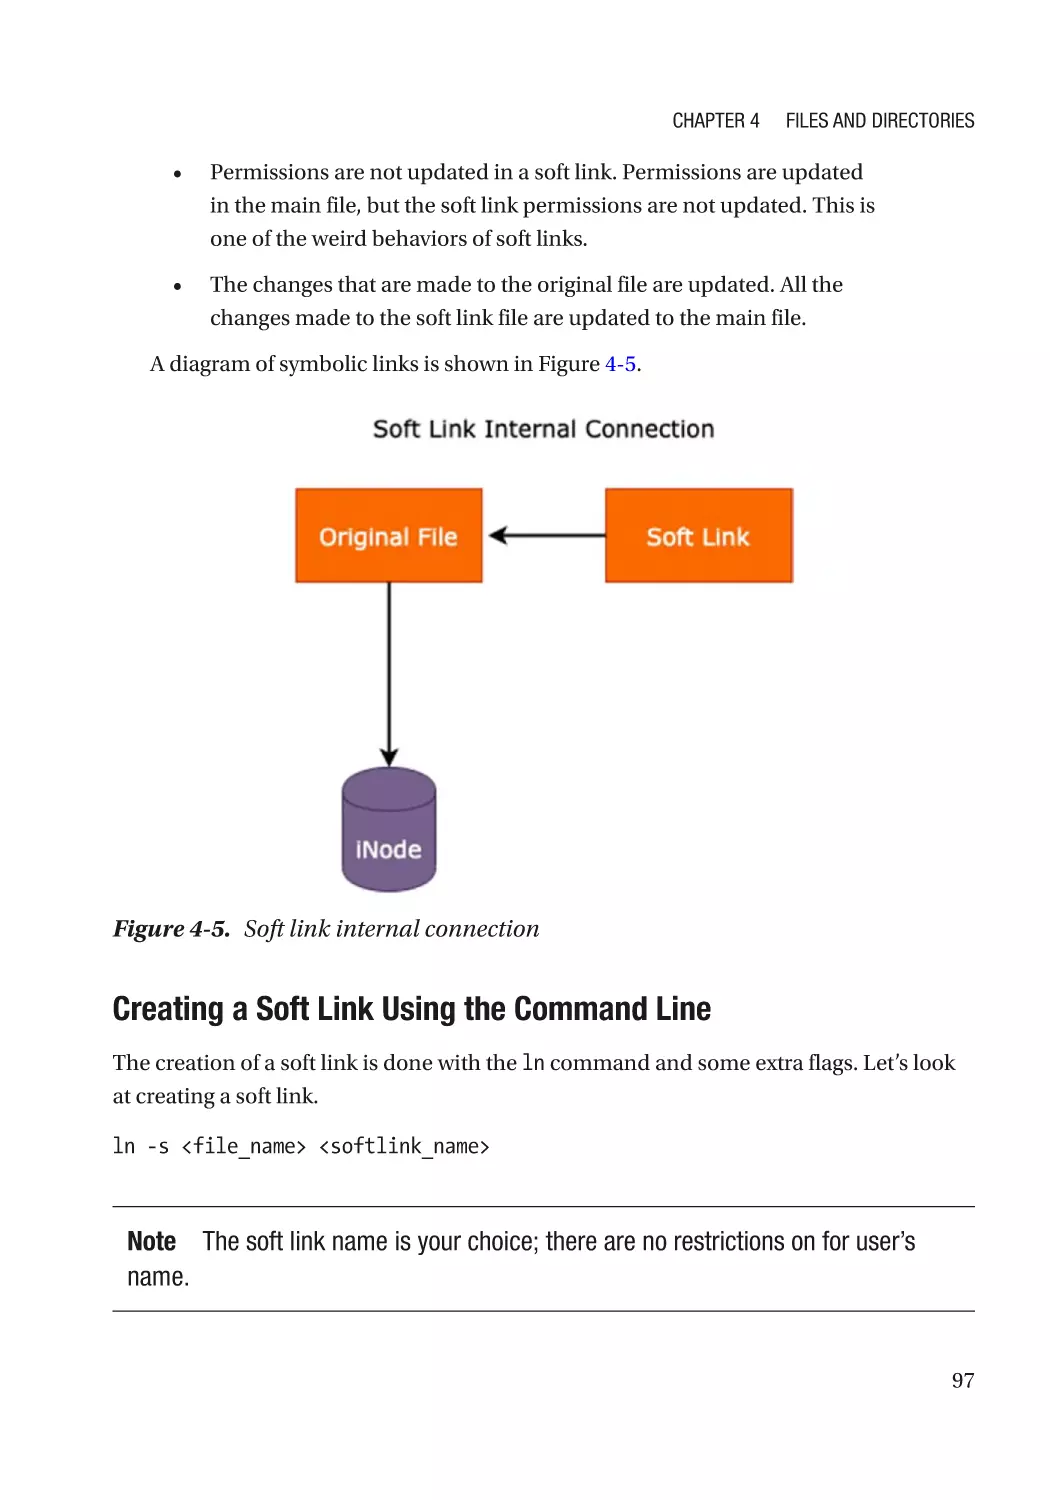 Creating a Soft Link Using the Command Line